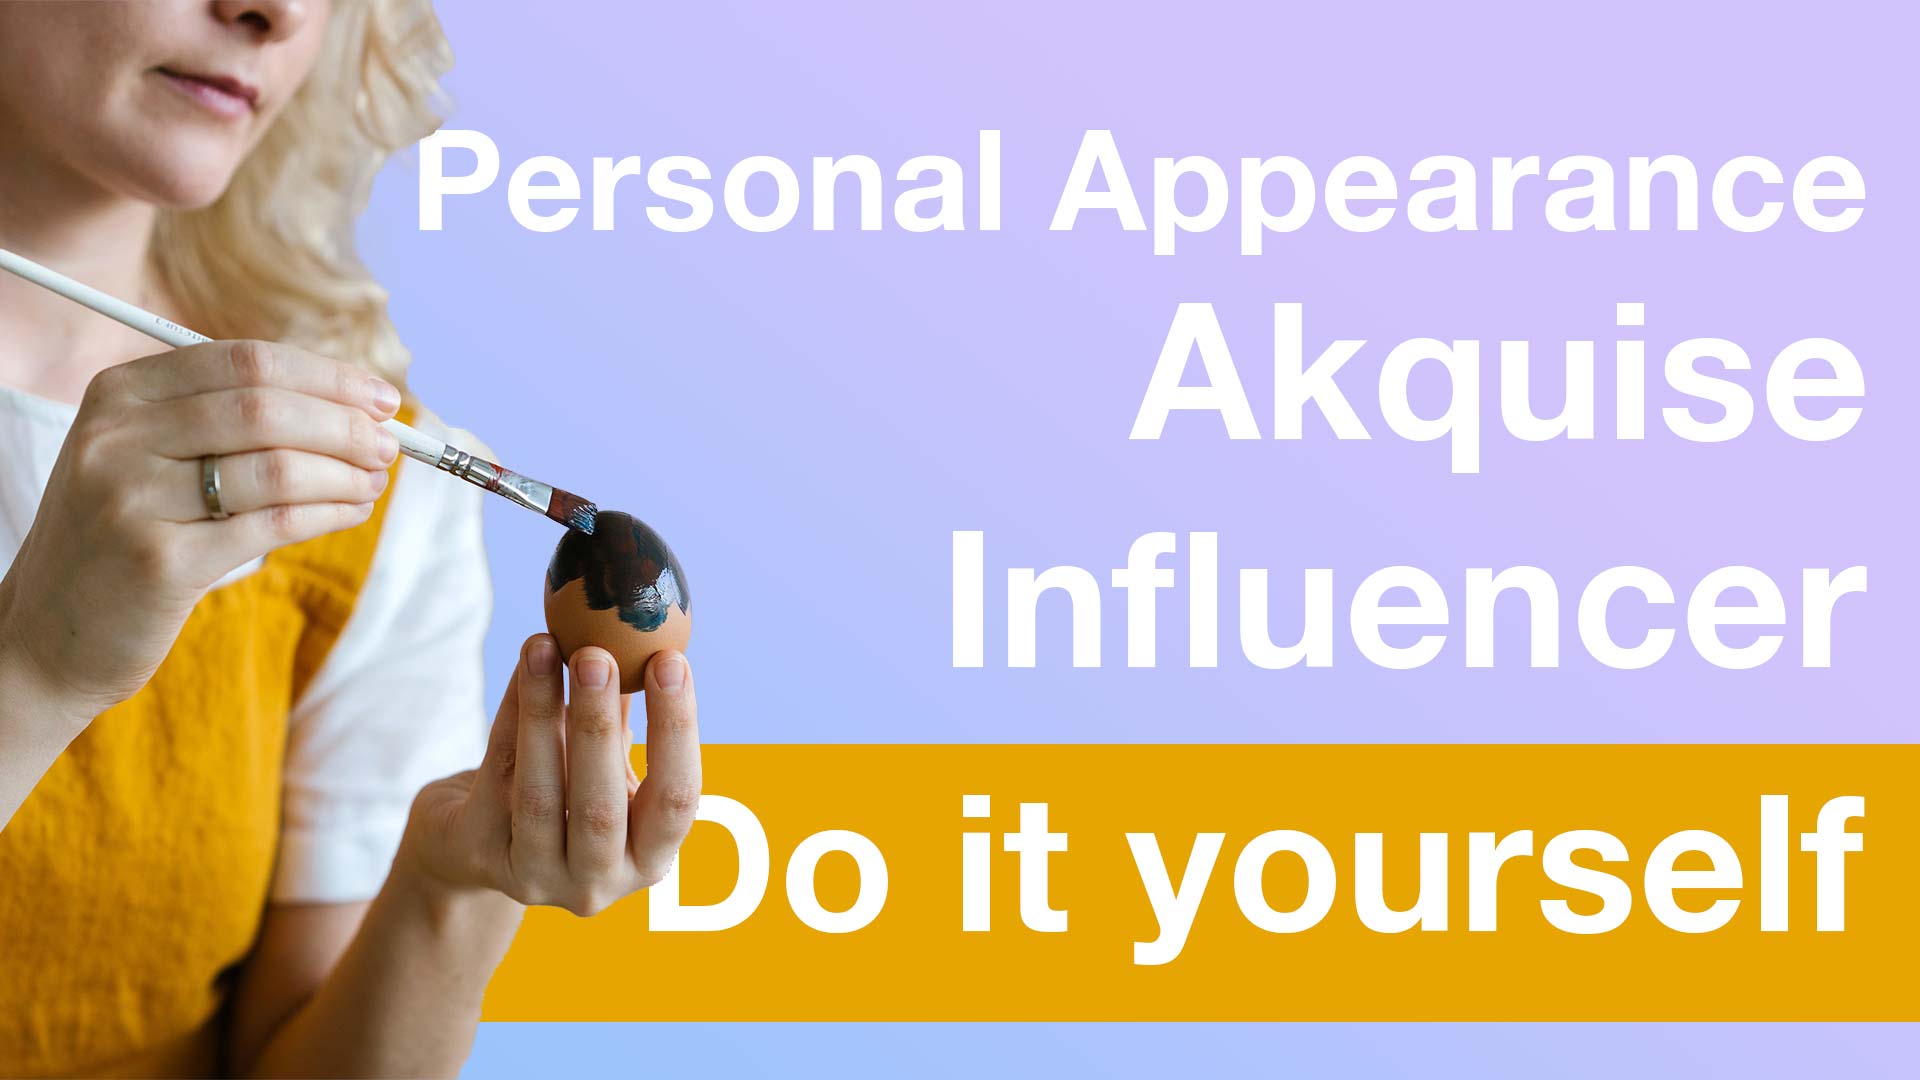 DIY (Do-it-yourself ) Influencer Marketing inkl. Personal Appearance